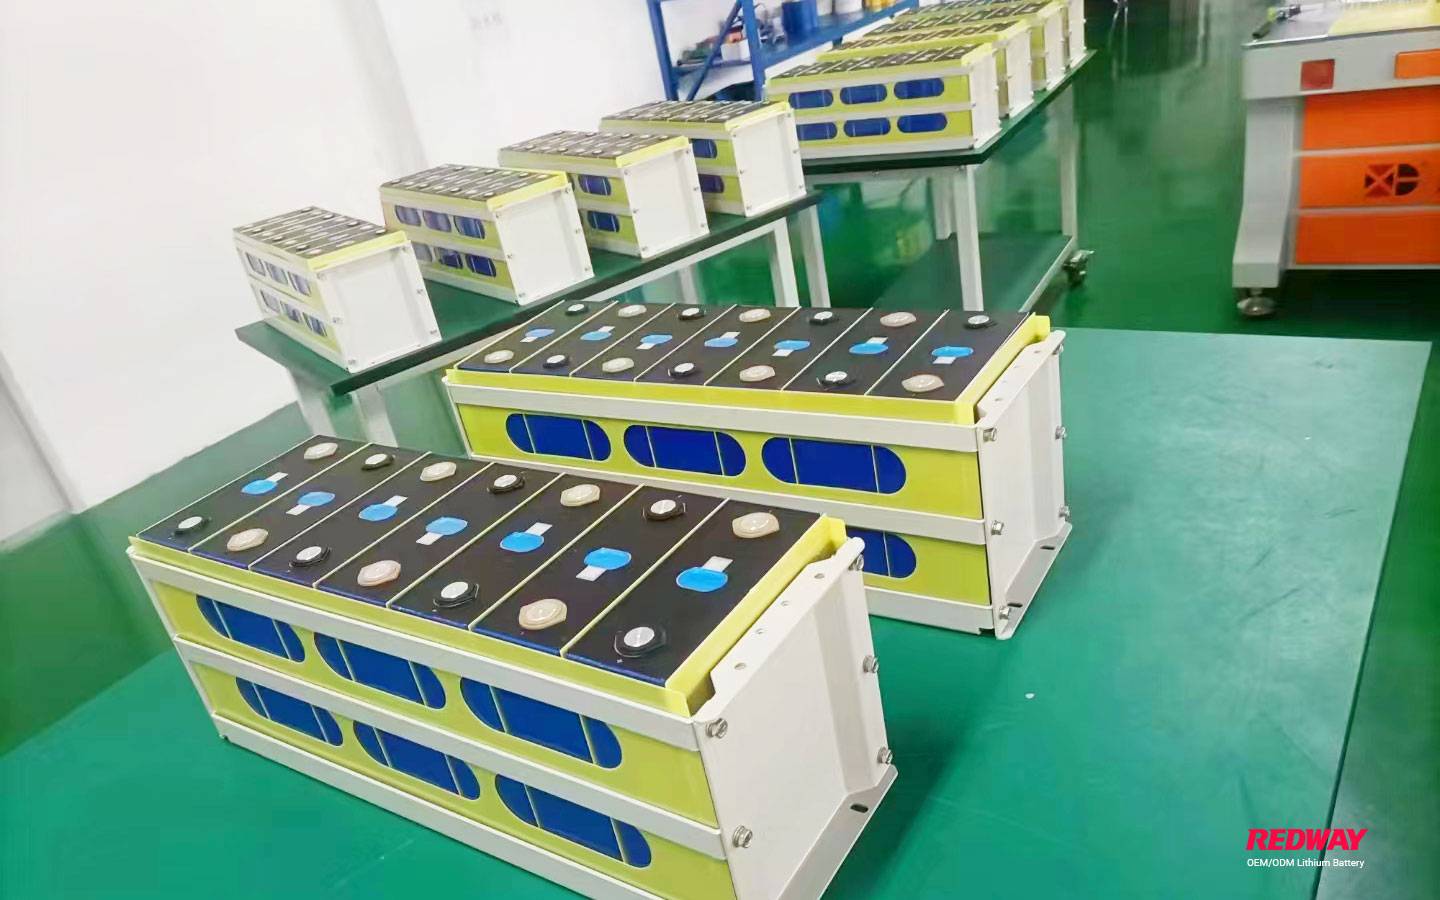 Power Lithium Battery Pack Product at Redway Power lithium battery factory.